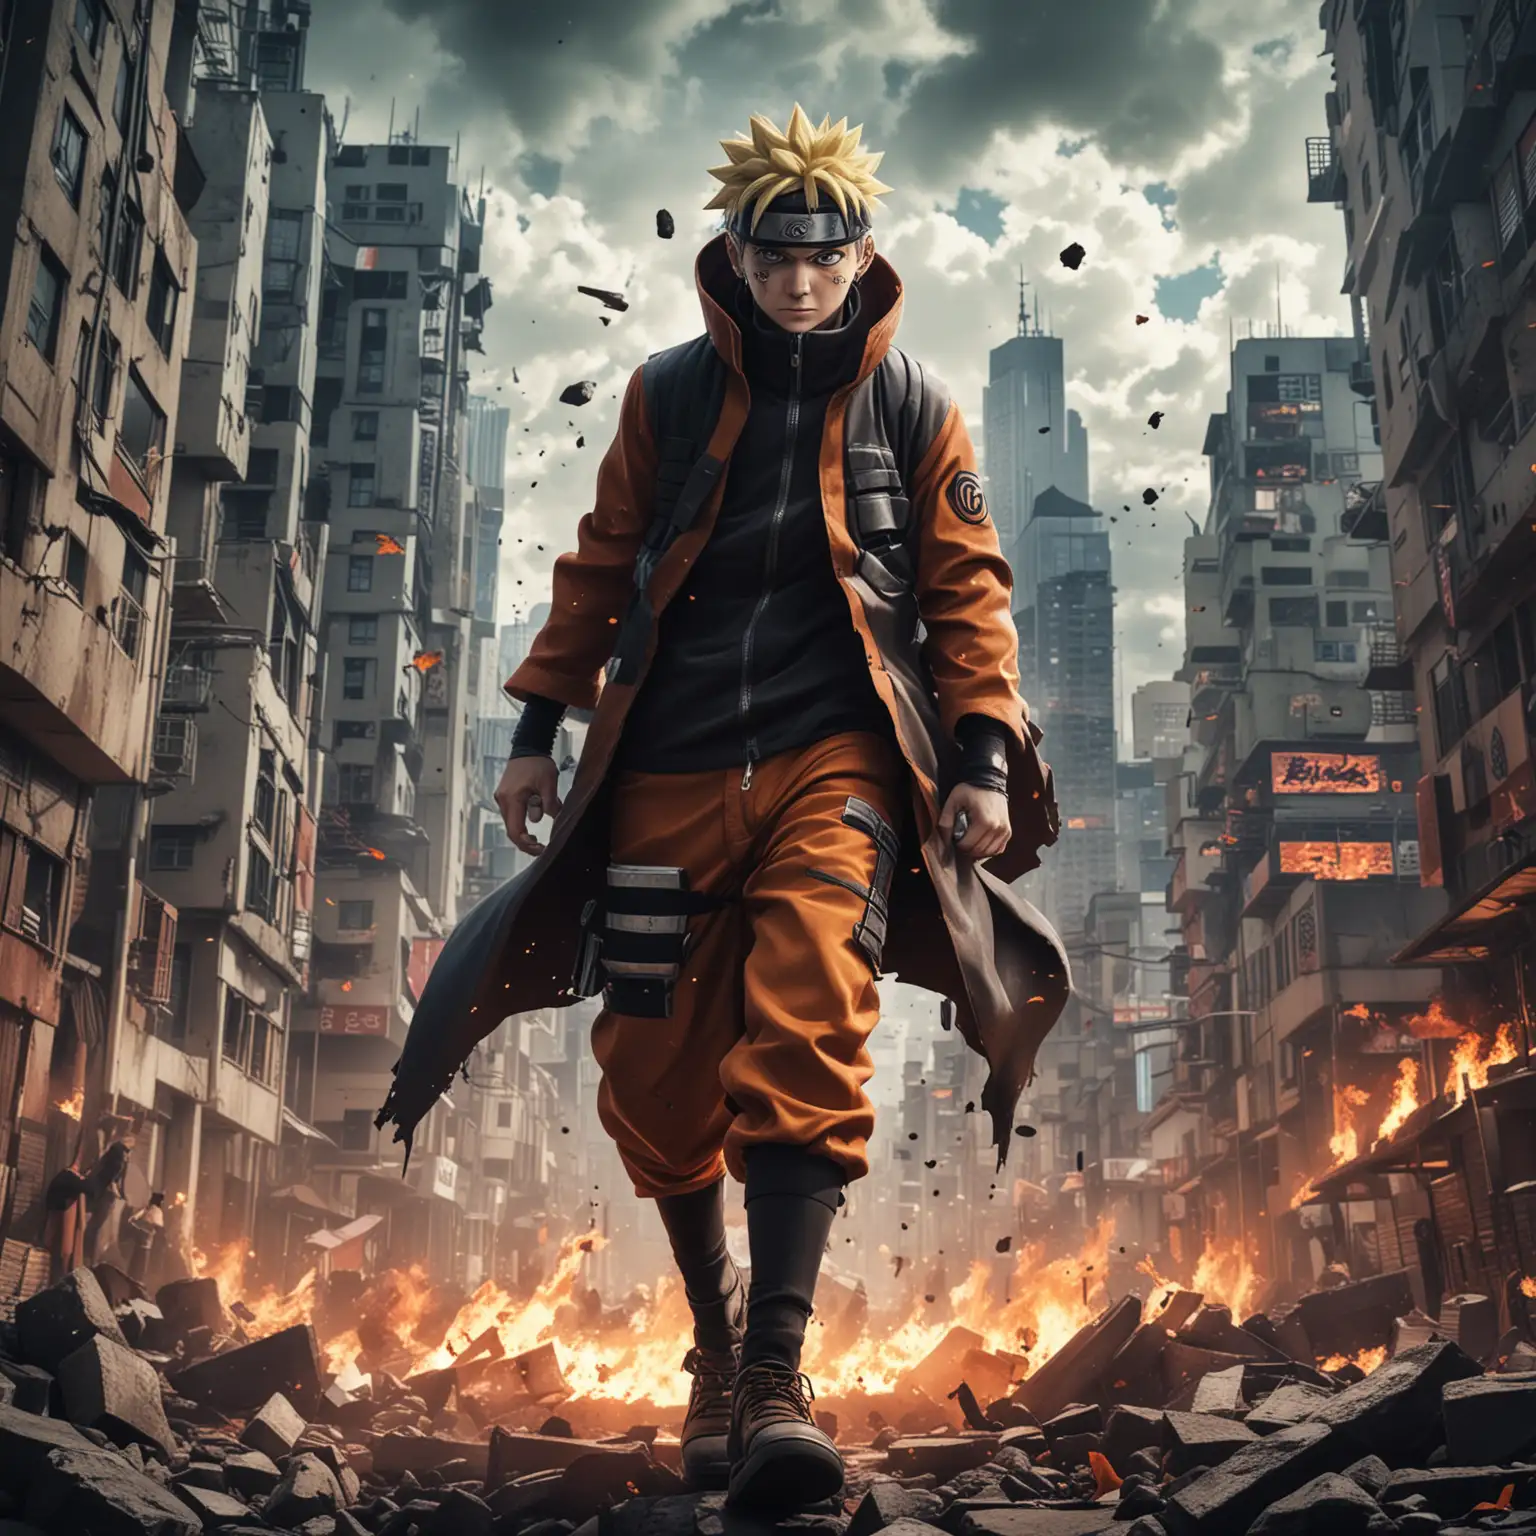 naruto, anime, aggressive, destroying the city, defending his friends, 4k